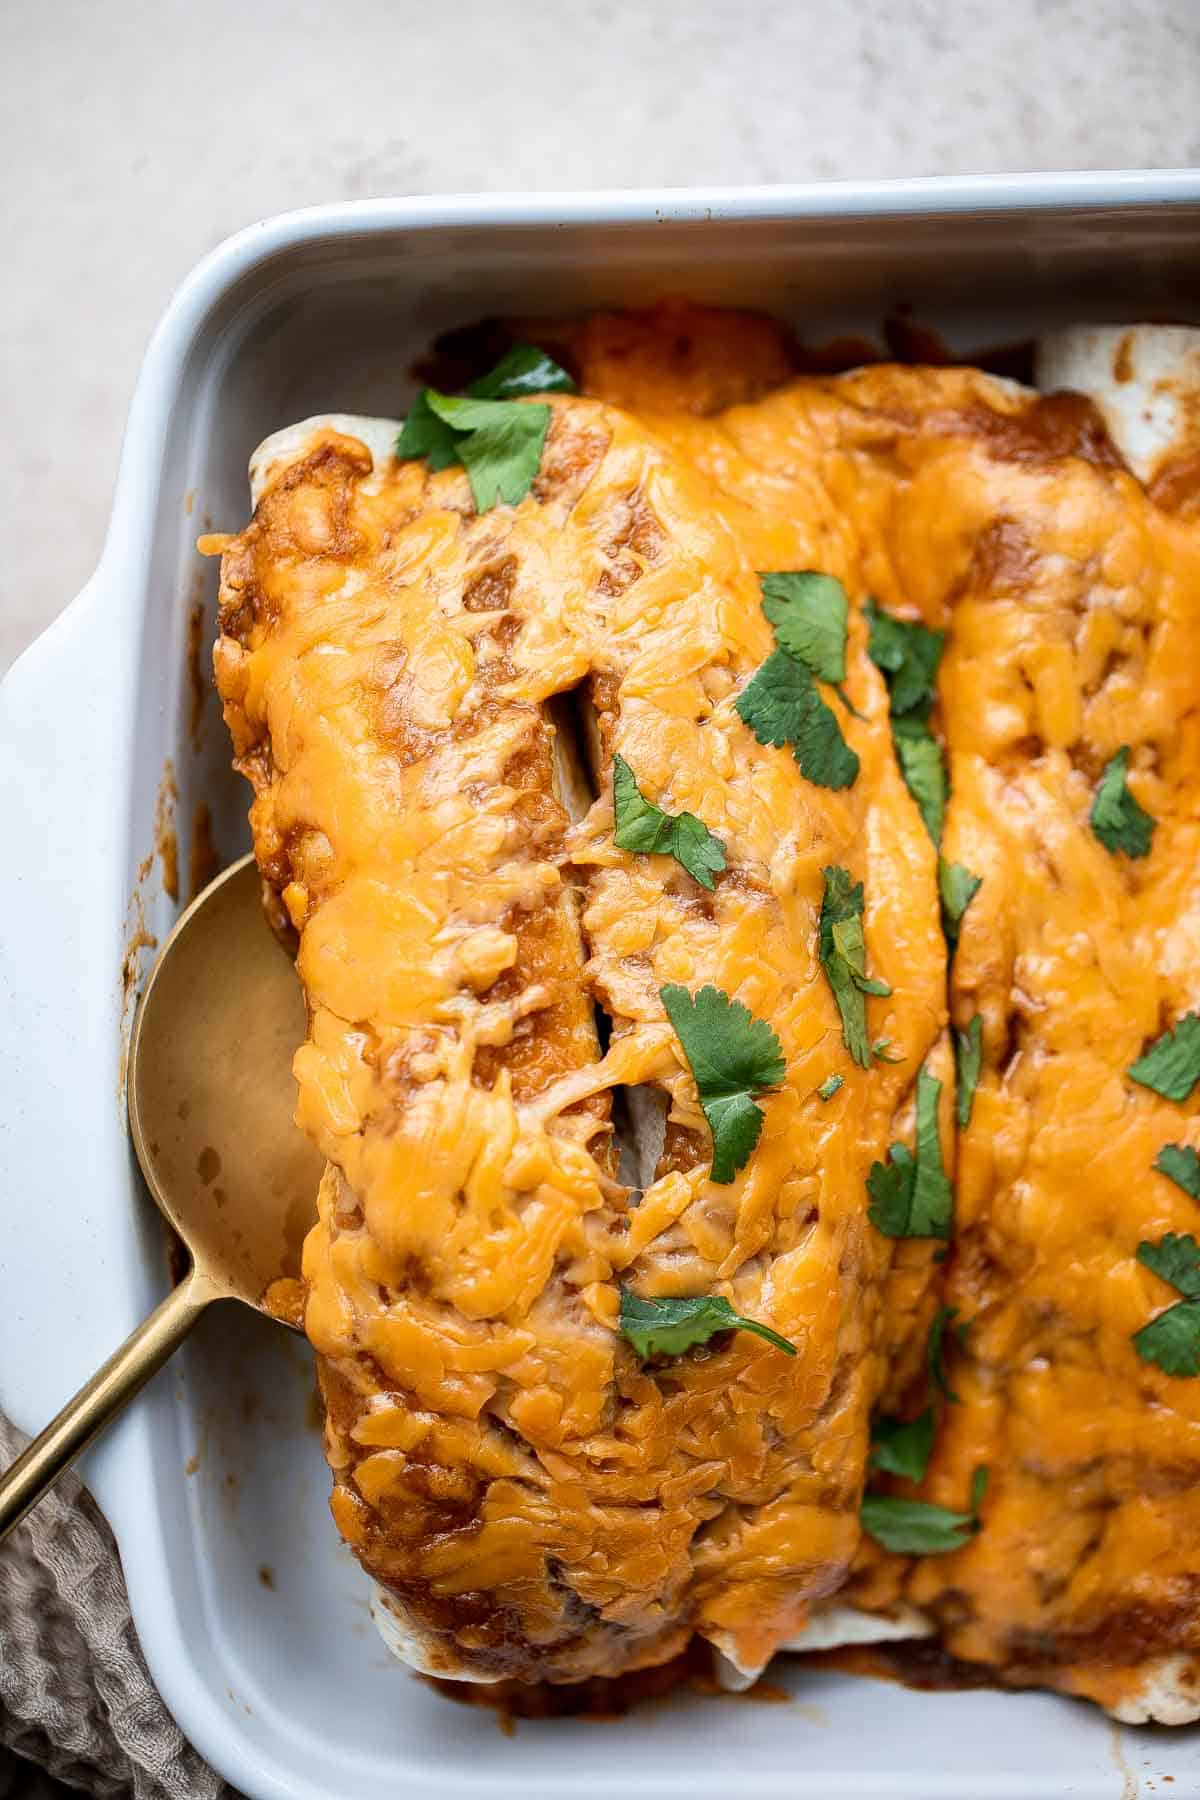 Shredded Beef Enchiladas are flavorful, saucy, and cheesy. They are easy to make for family dinner using just a few ingredients including leftover beef. | aheadofthyme.com